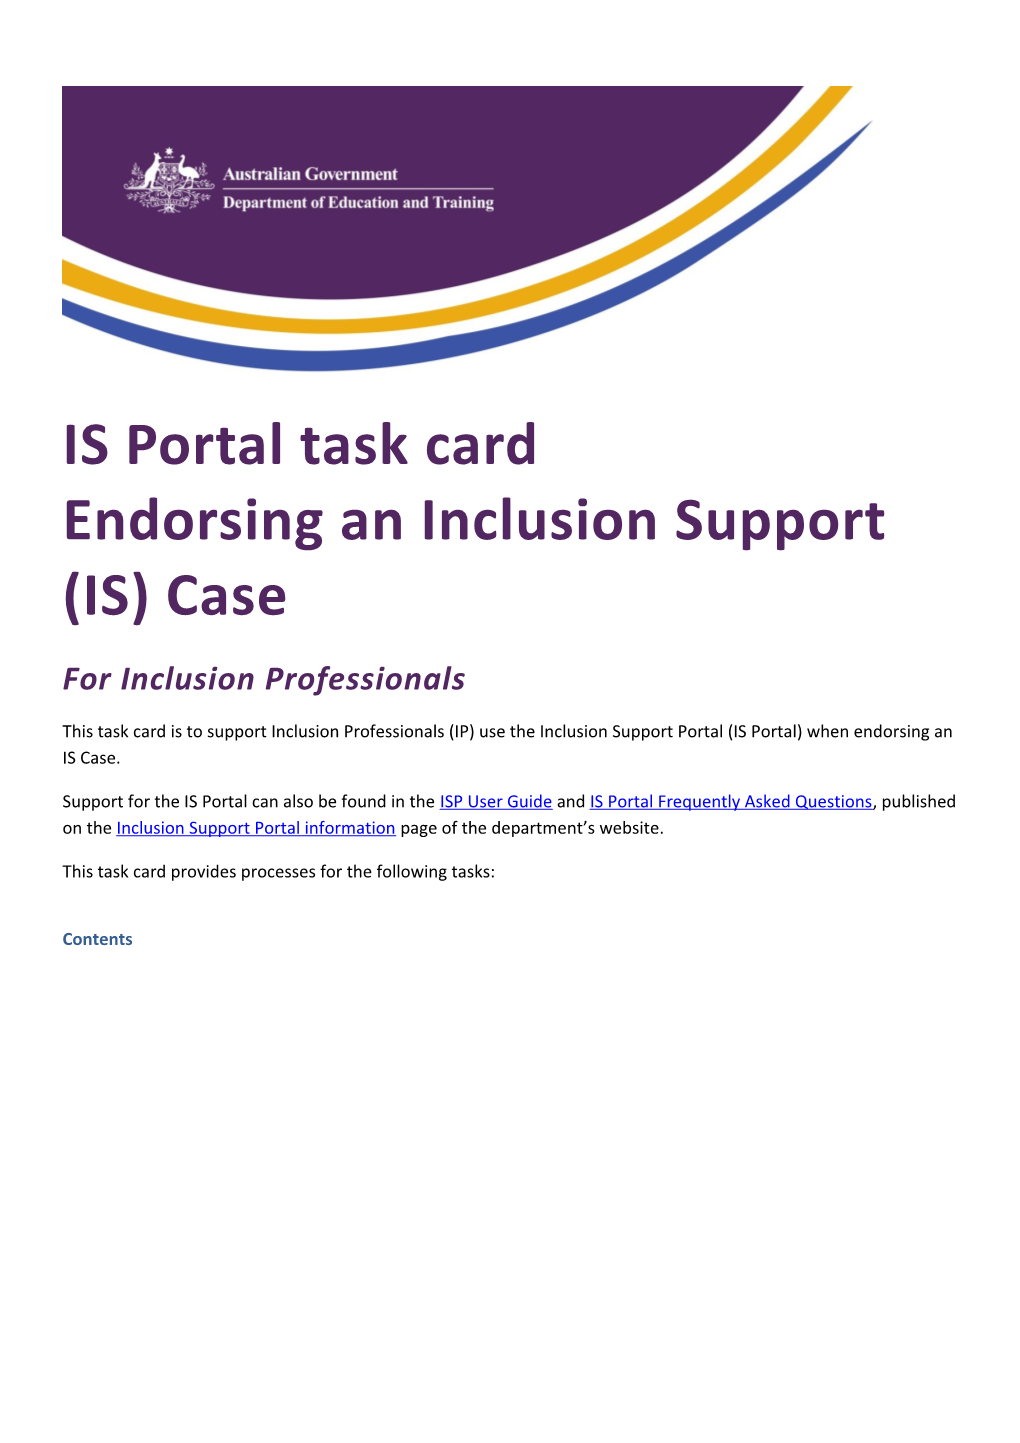 IS Portaltask Card Endorsing an Inclusion Support (IS) Case